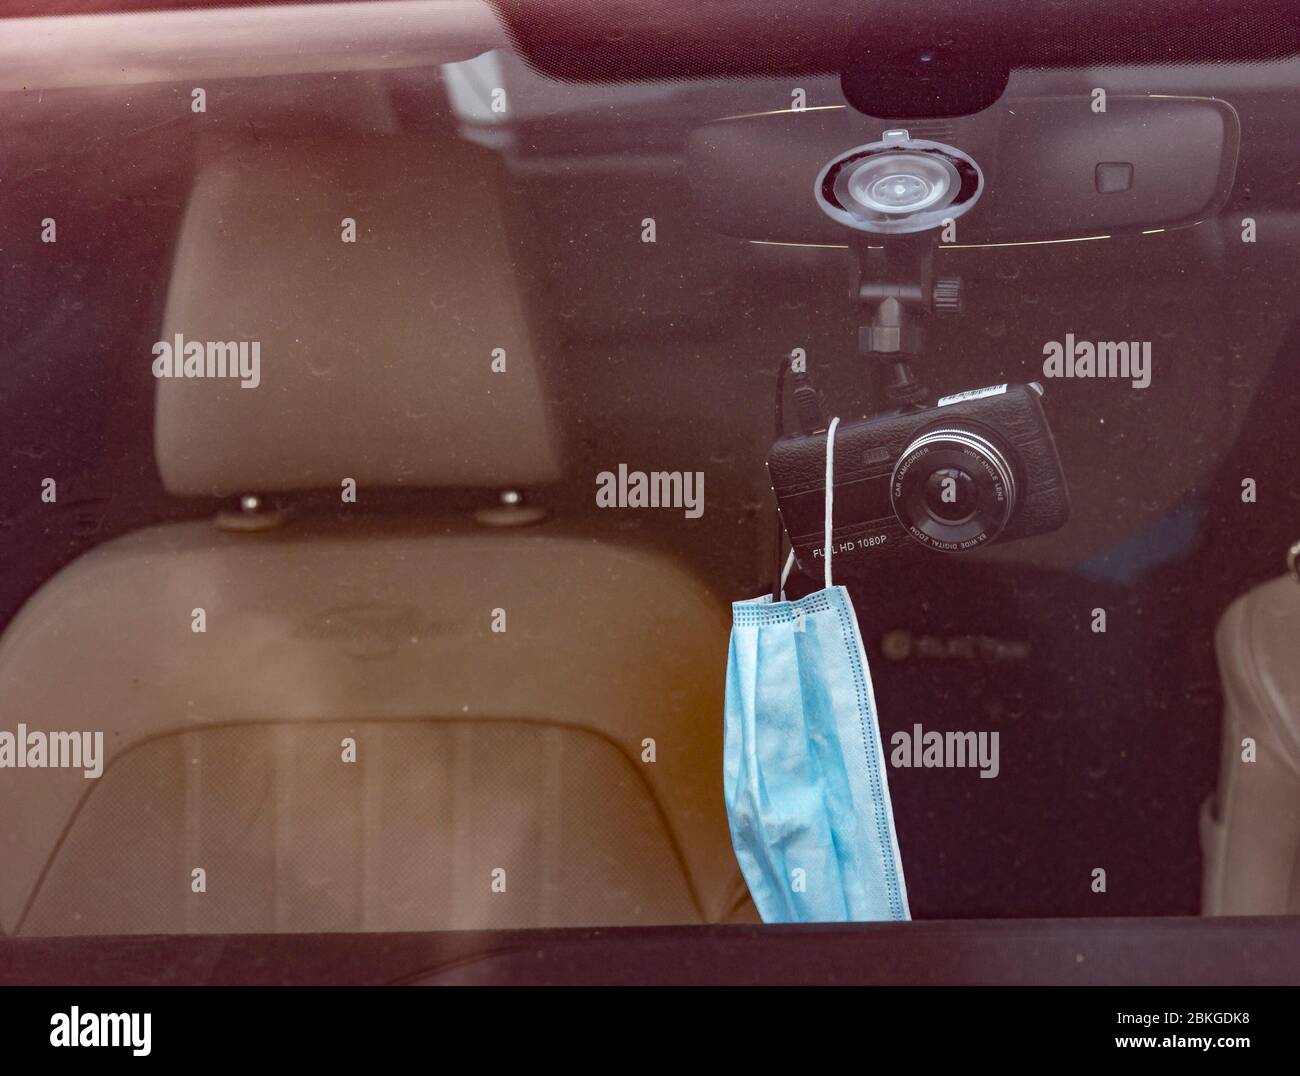 https://c8.alamy.com/comp/2BKGDK8/a-protective-surgical-masc-hanging-from-a-dashboard-camera-in-a-car-2BKGDK8.jpg